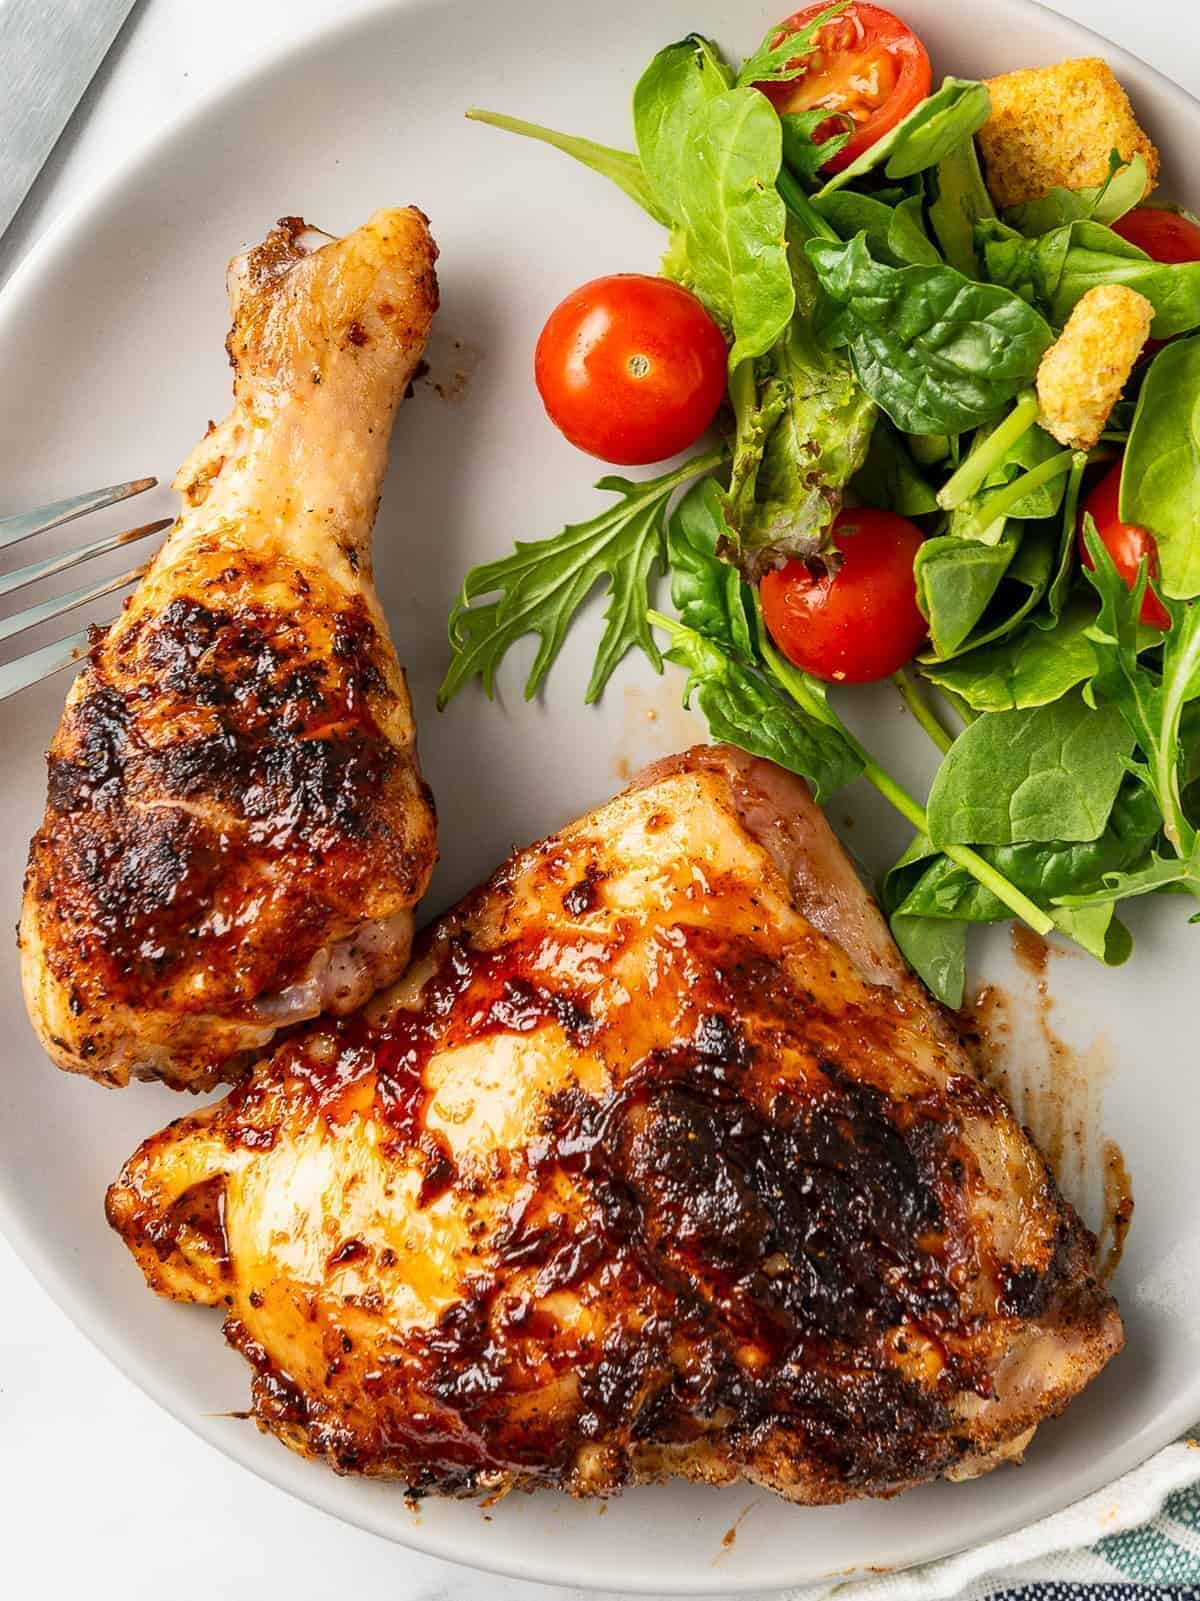 bbq chicken drumstick and thigh on plate with salad